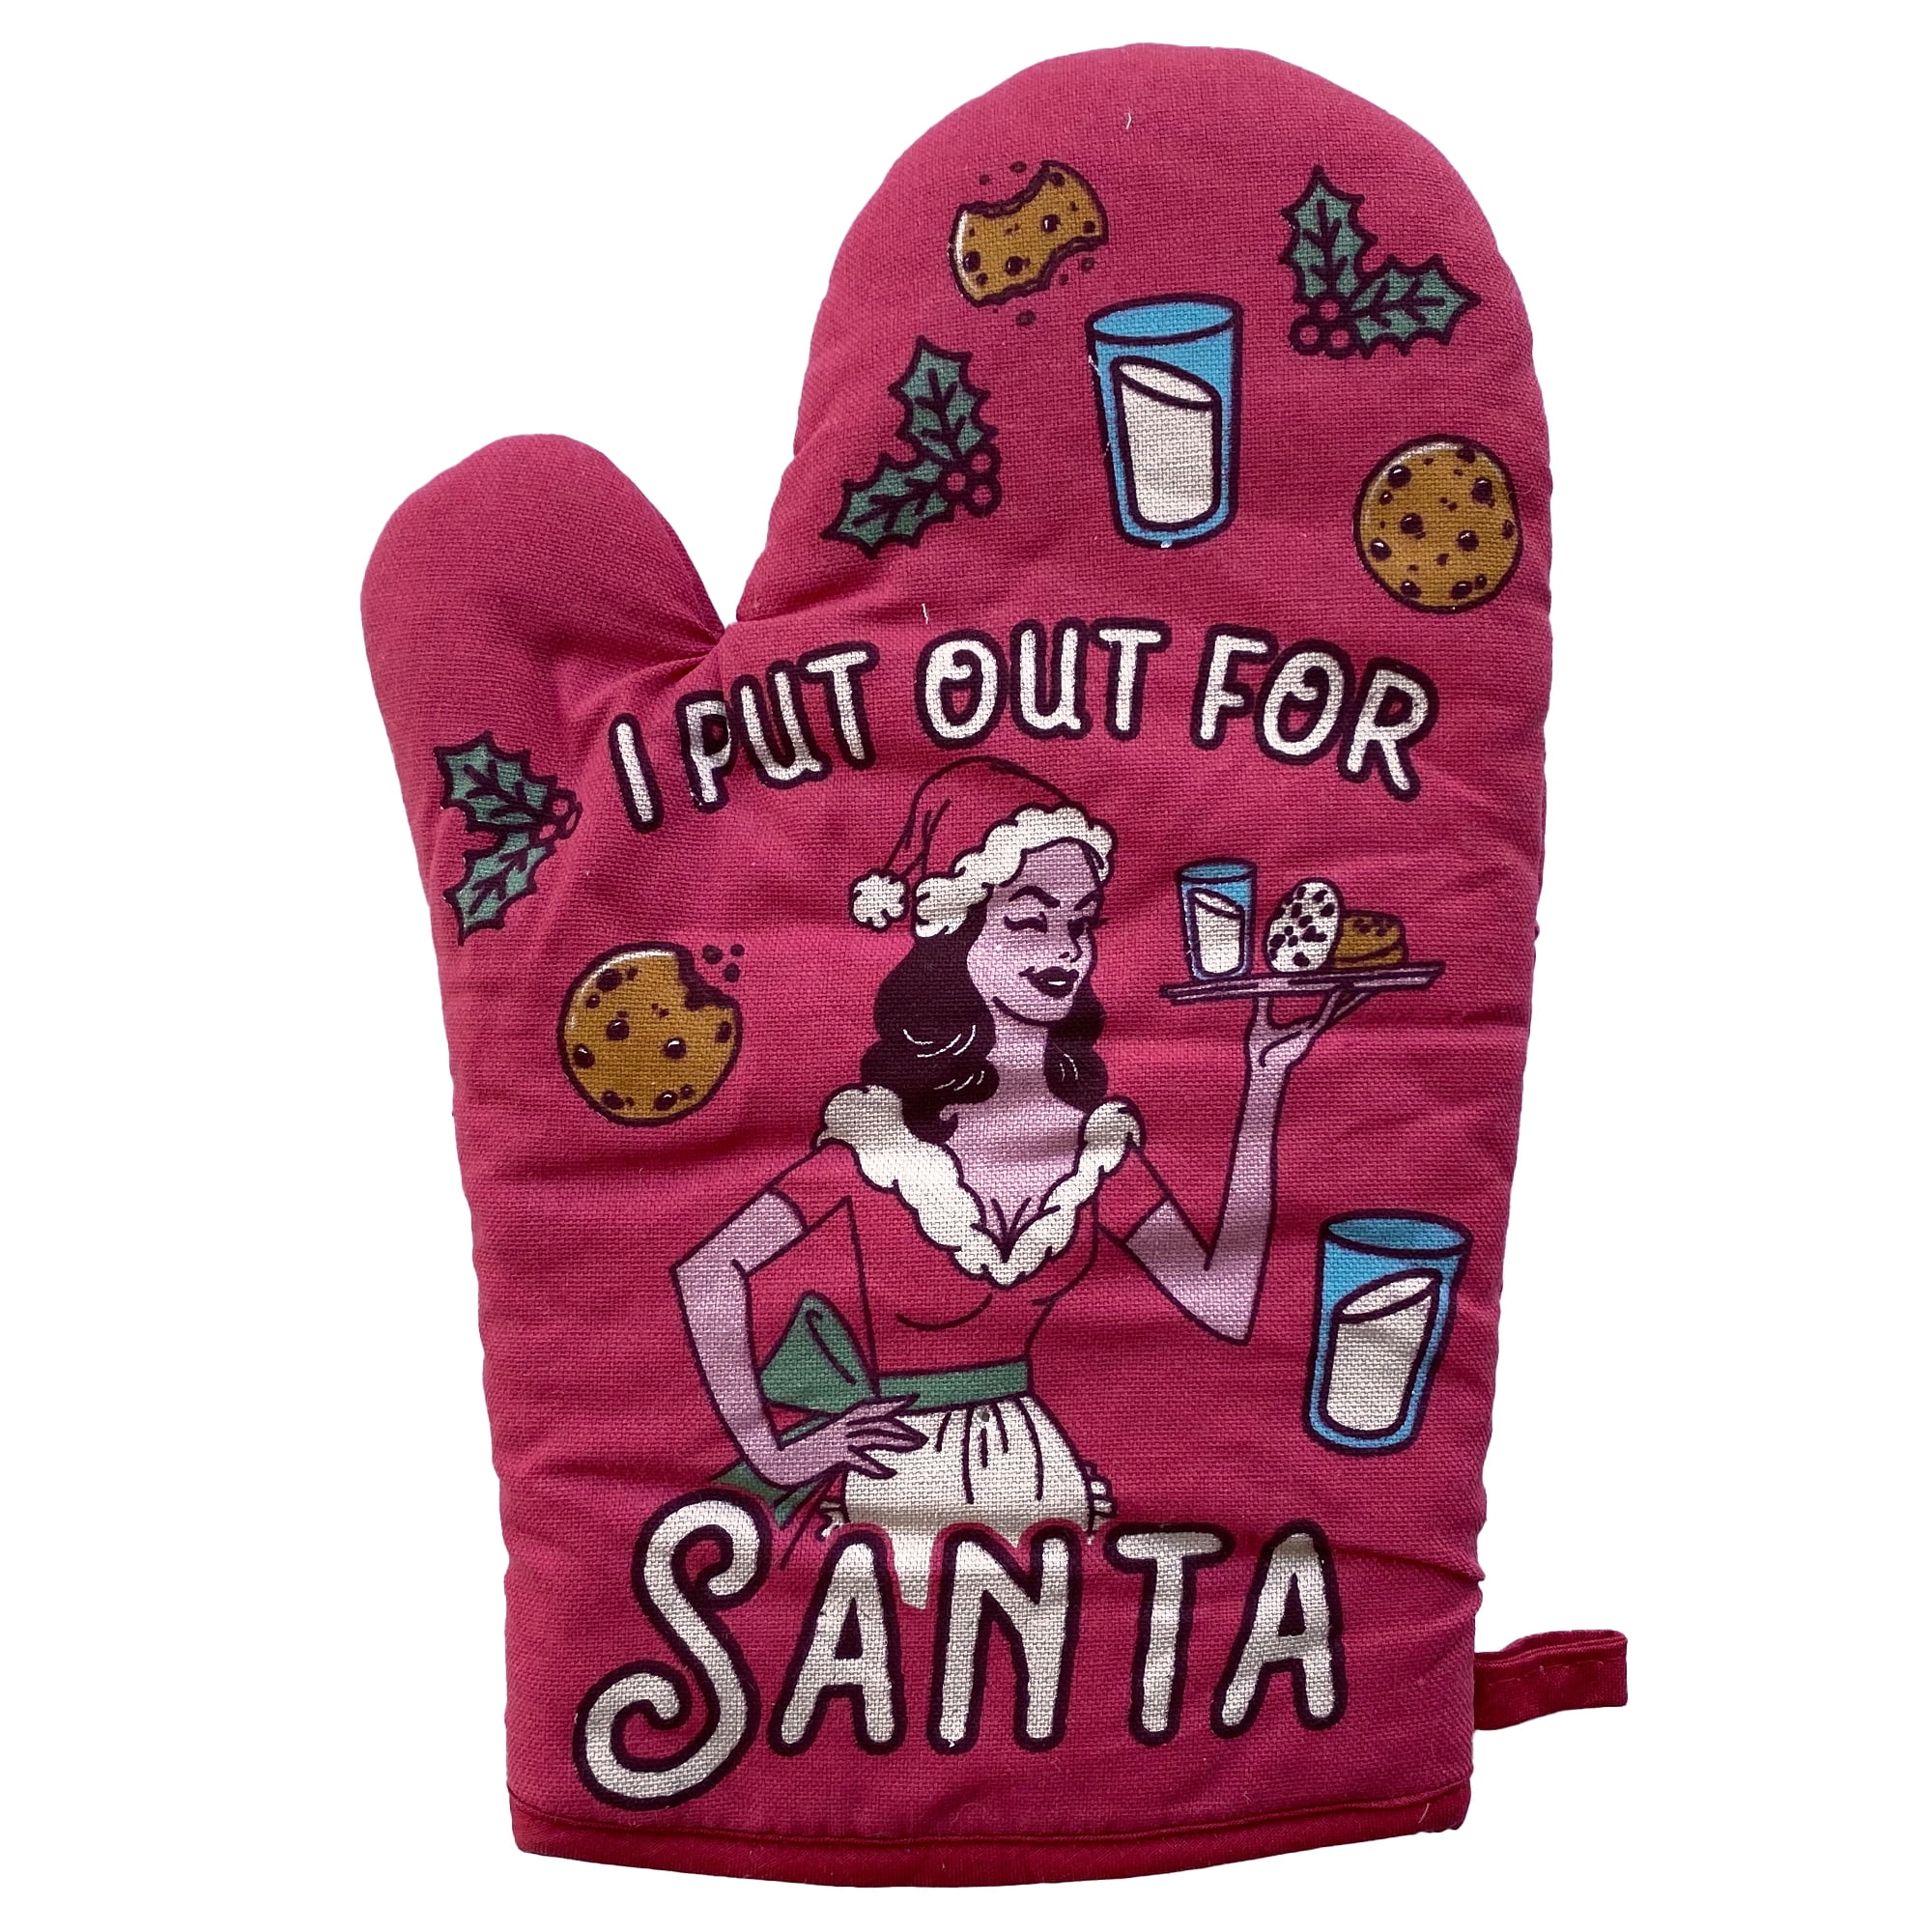 Up To 71% Off on Christmas Oven Mitts and Pot